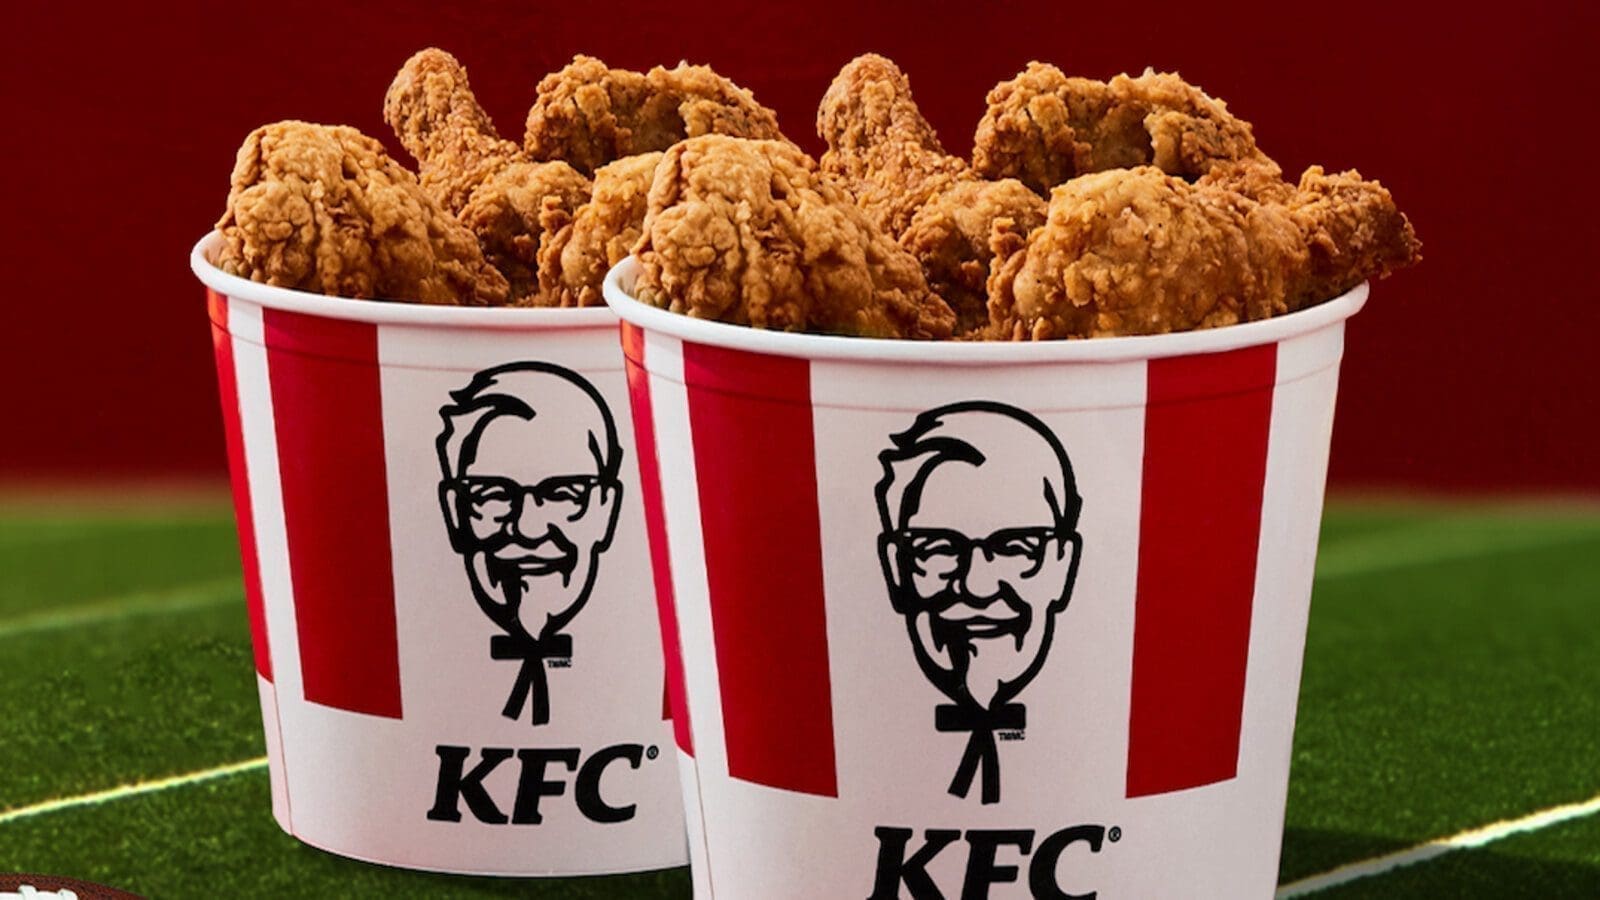 KFC Morocco plans open 10 more outlets in 2023 in ambitious expansion drive